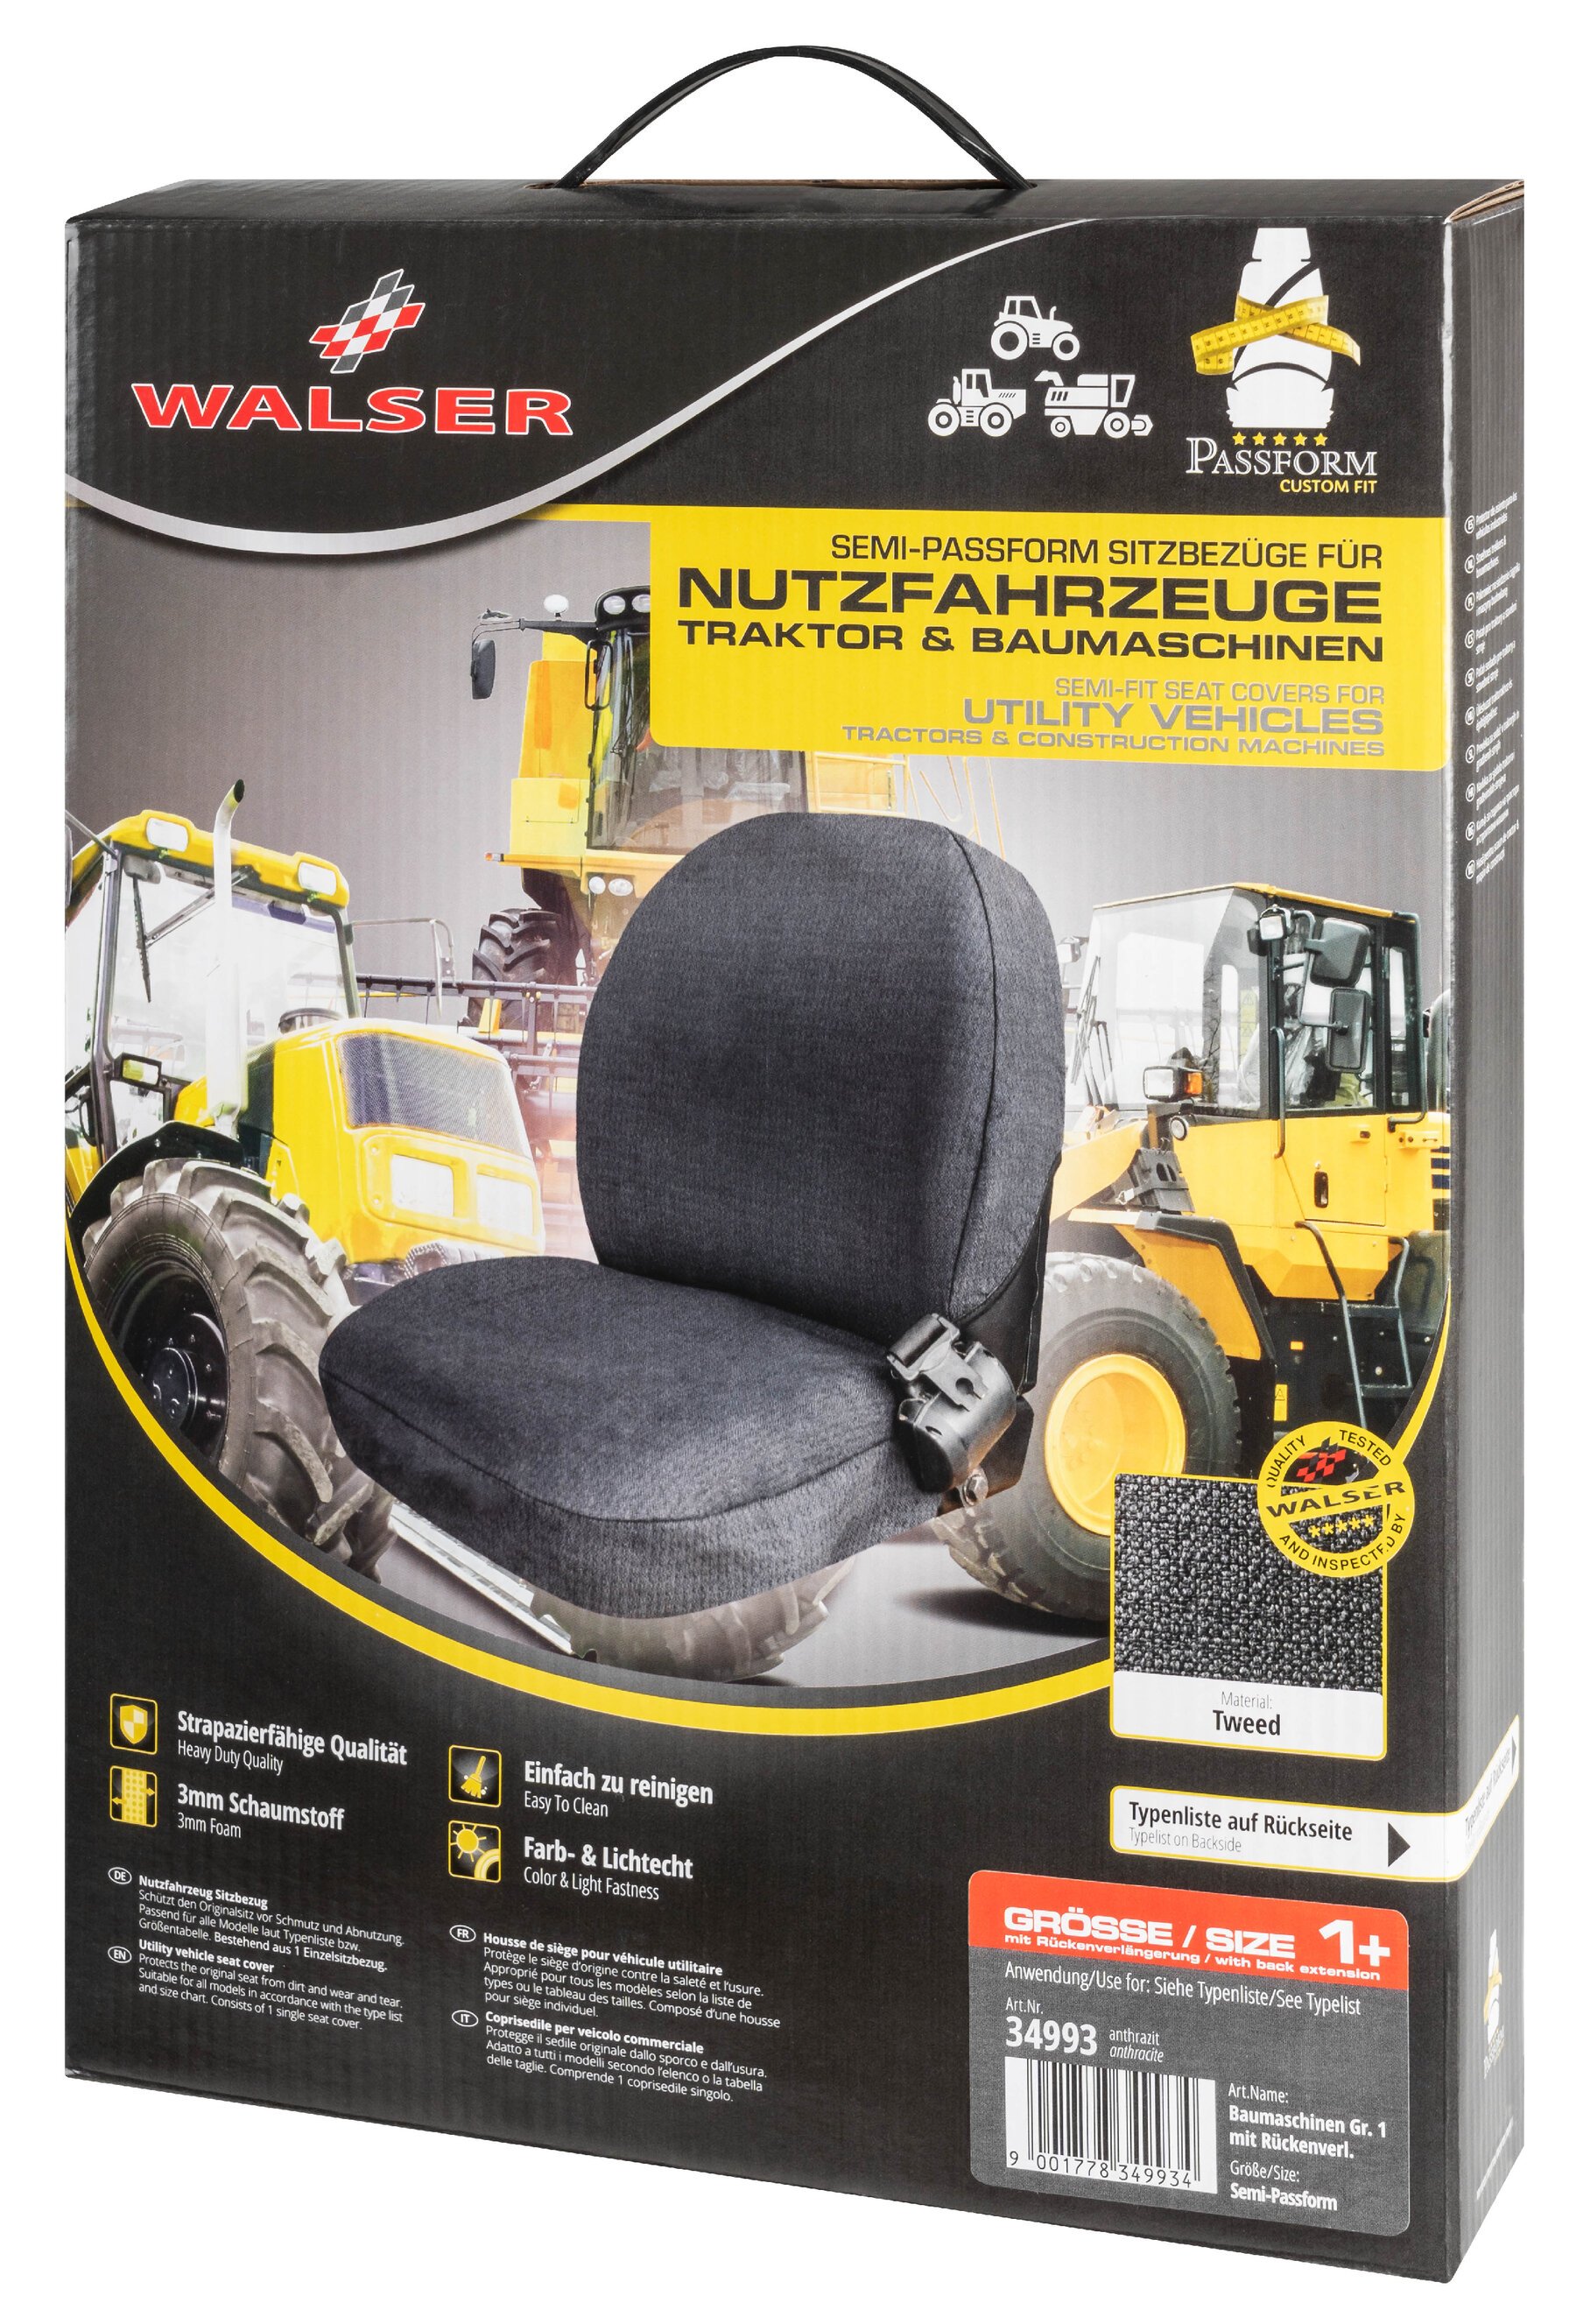 Semi-fit Seat cover for tractors and construction machinery - size 1 with back extension